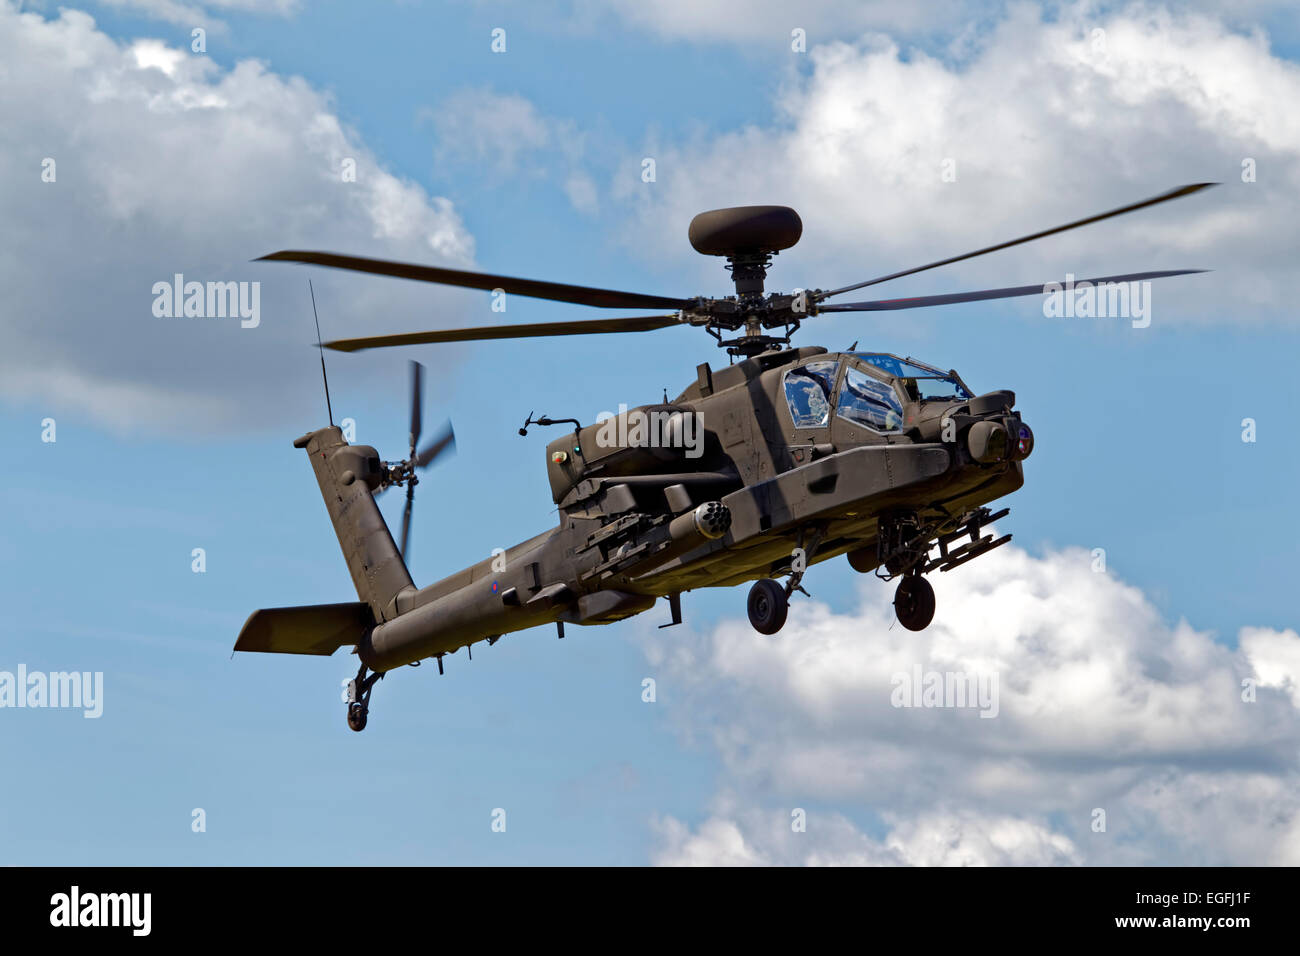 A British Army Air Corps AgustaWestland WAH-64D Apache AH.1 helicopter flies over Salisbury Plain in Wiltshire, United Kingdom. Stock Photo